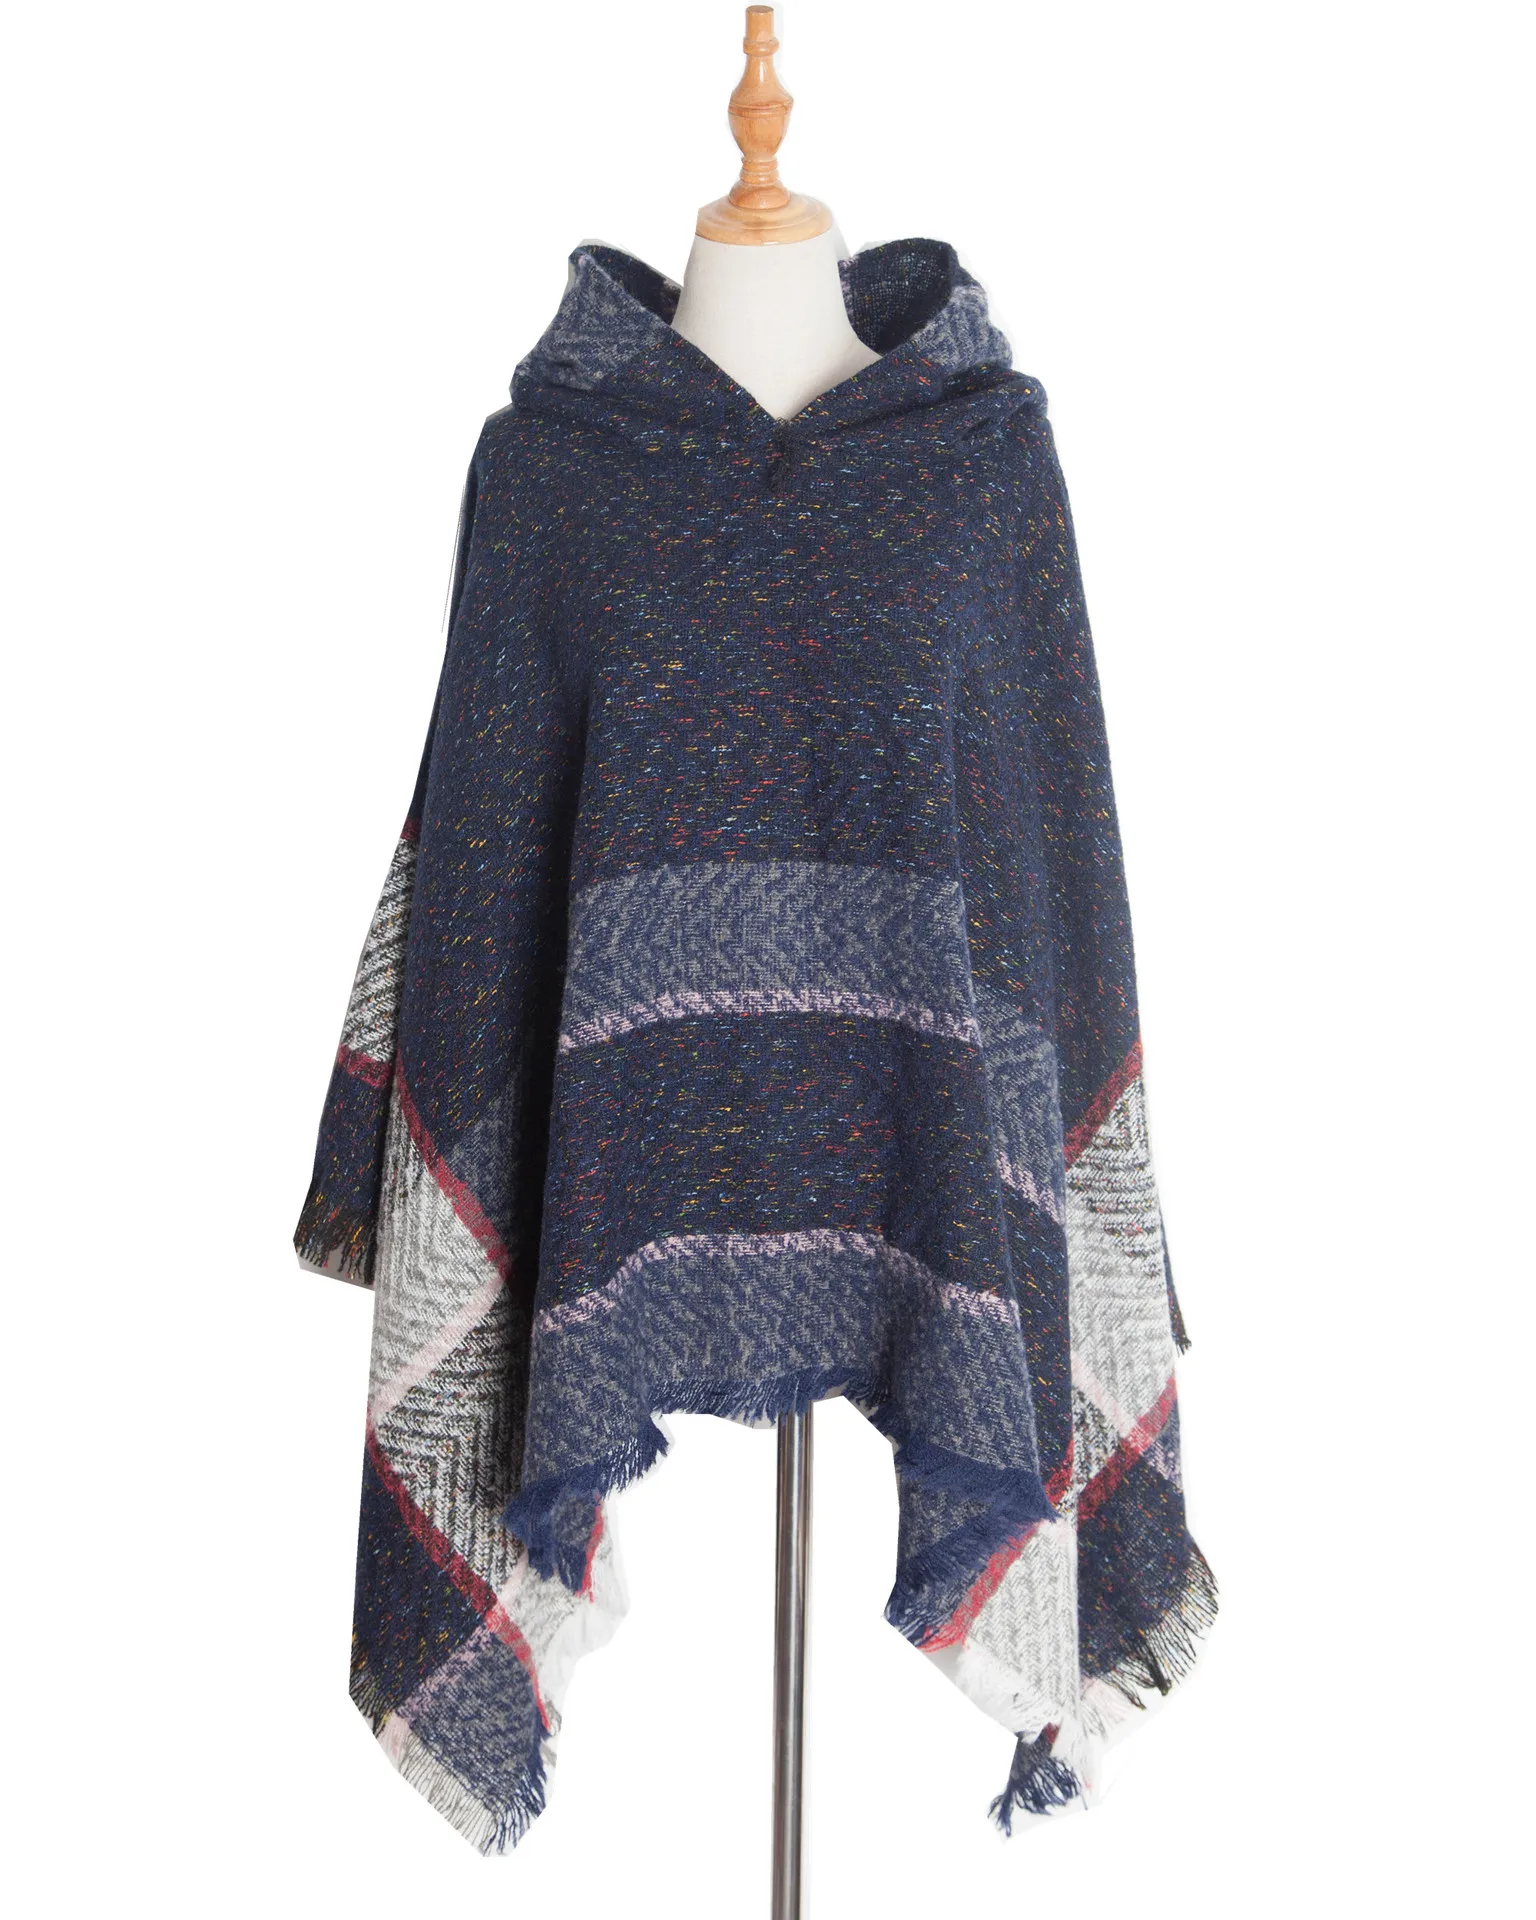 New Autumn Winter Fishbone Pattern Women's Hooded Cape Pullover Cape Women Poncho Lady Capes Navy Cloaks autumn winter double faced cape women s knitted coat warm imitation cashmere poncho lady capes gray cloaks